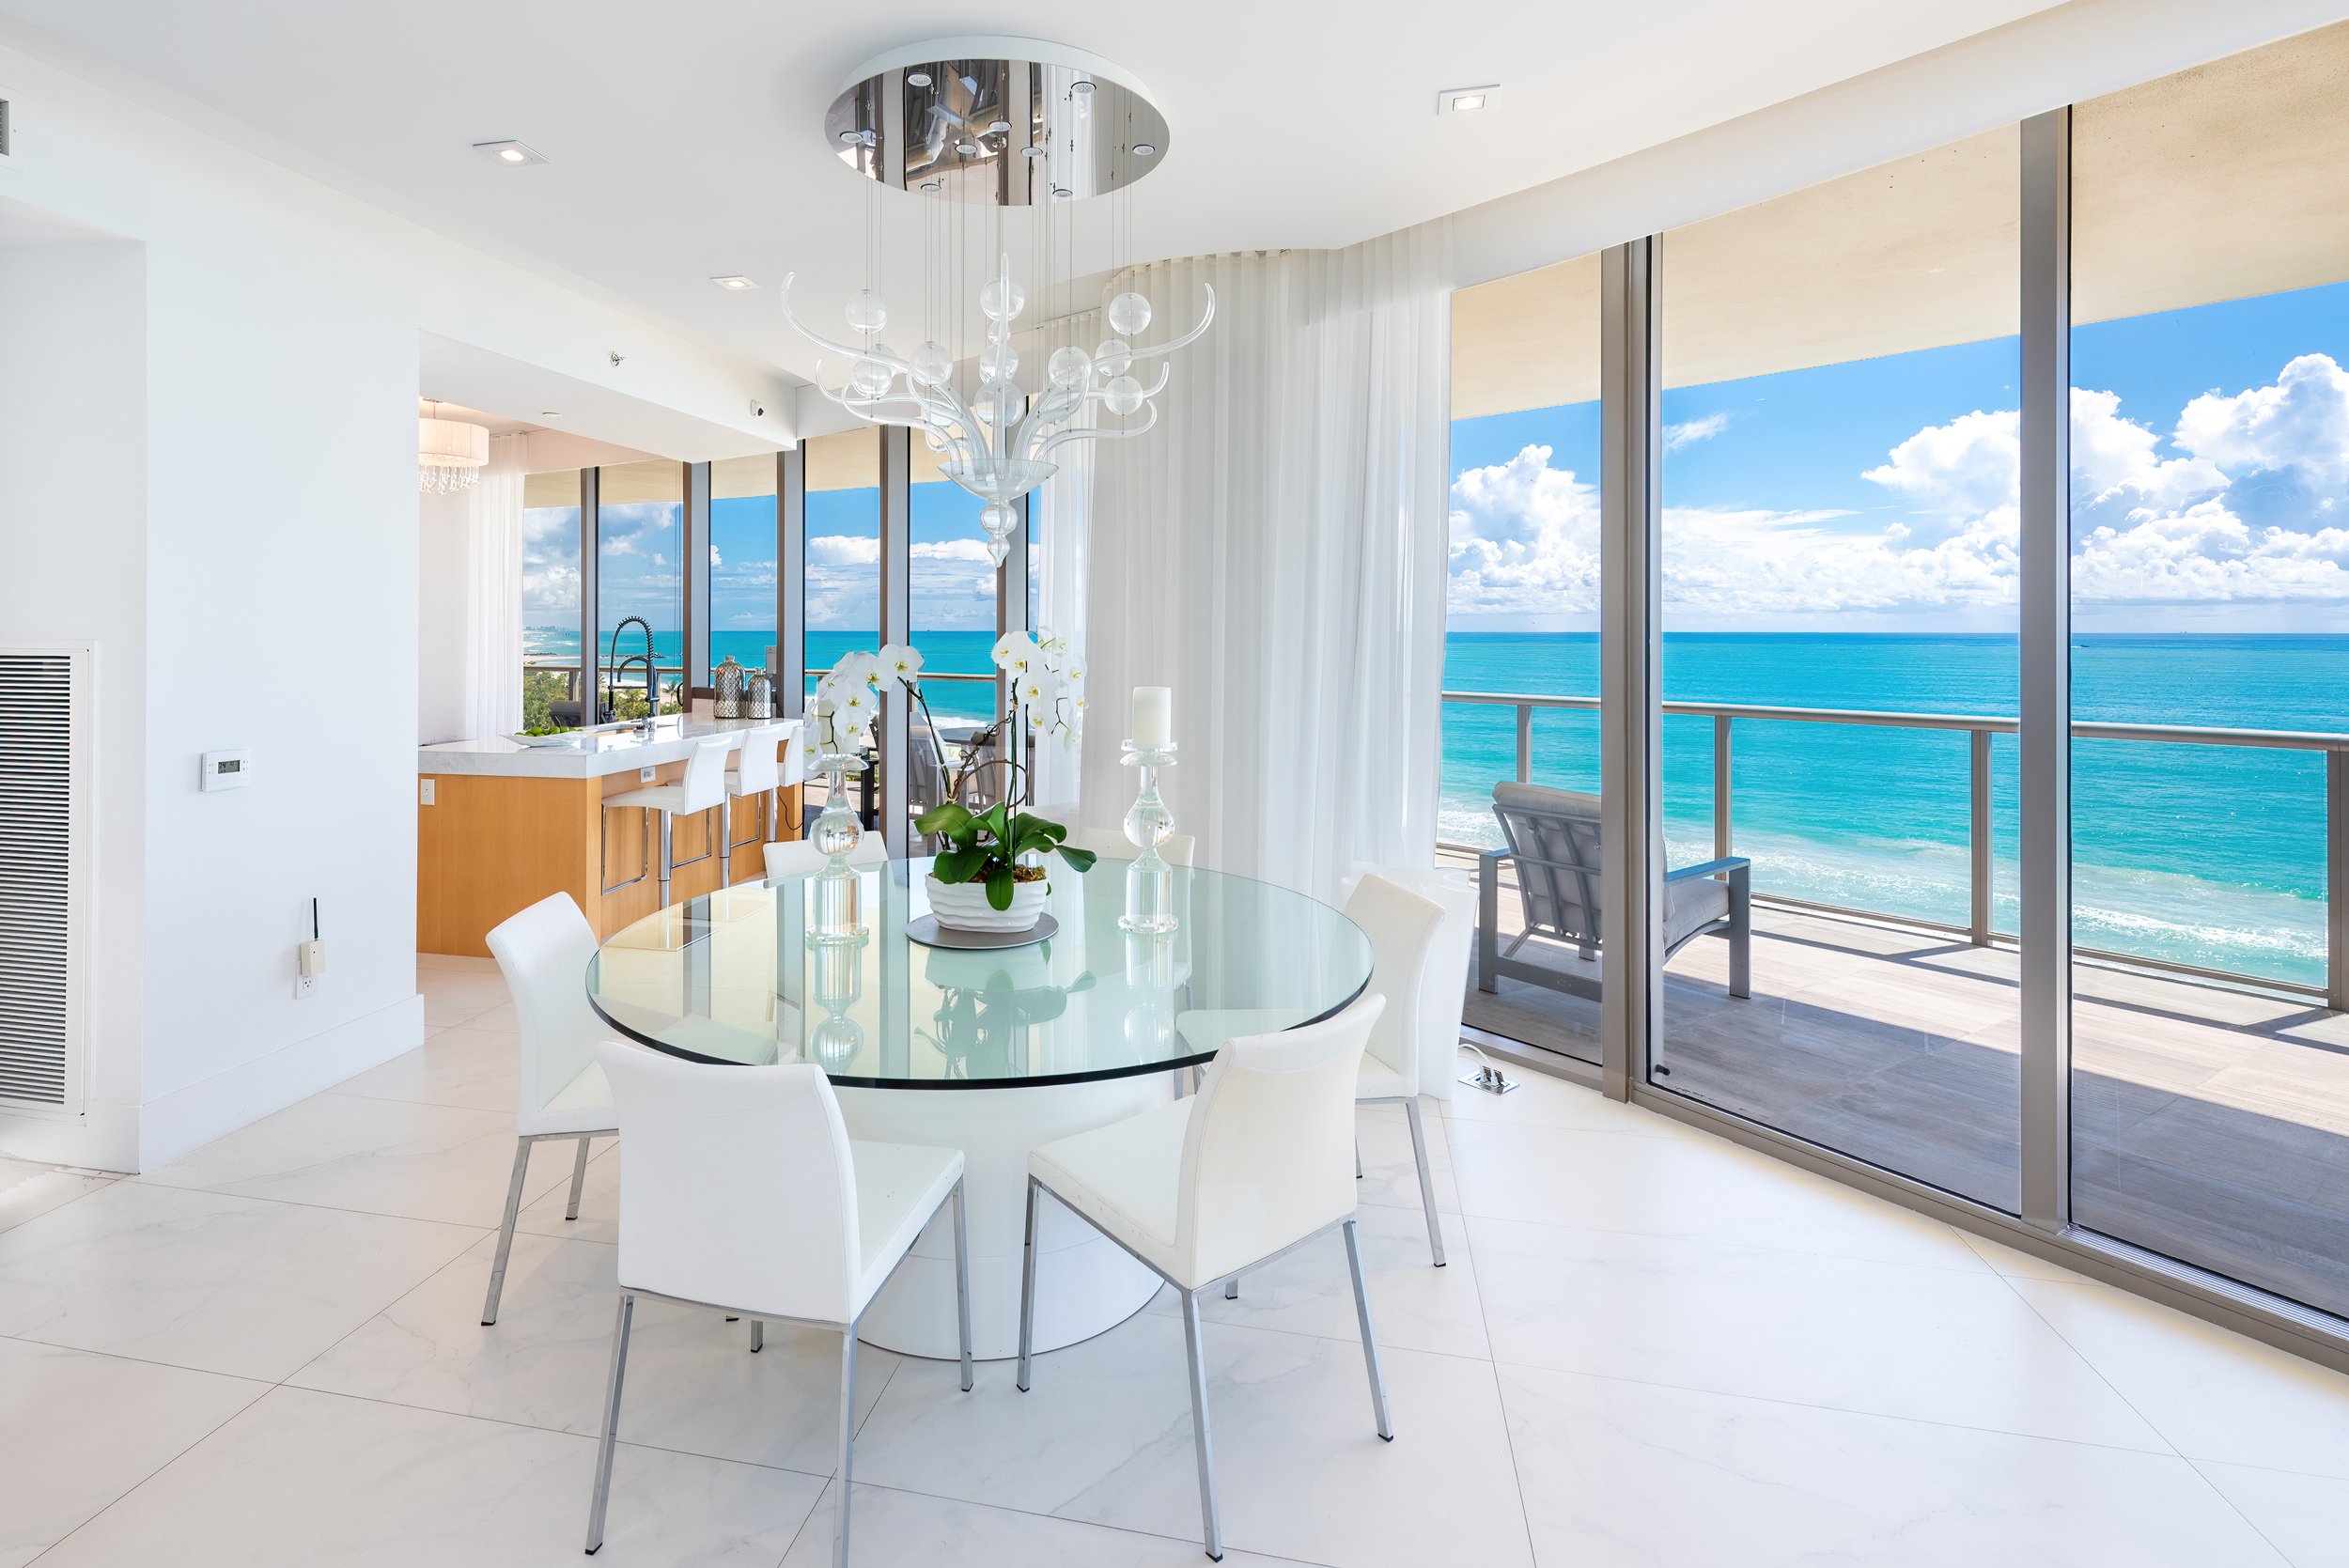 Master Brokers Forum Listing: See The Views From This Beachfront Condo In St. Regis Bal Harbour Asking $10.995 Million 13.JPG